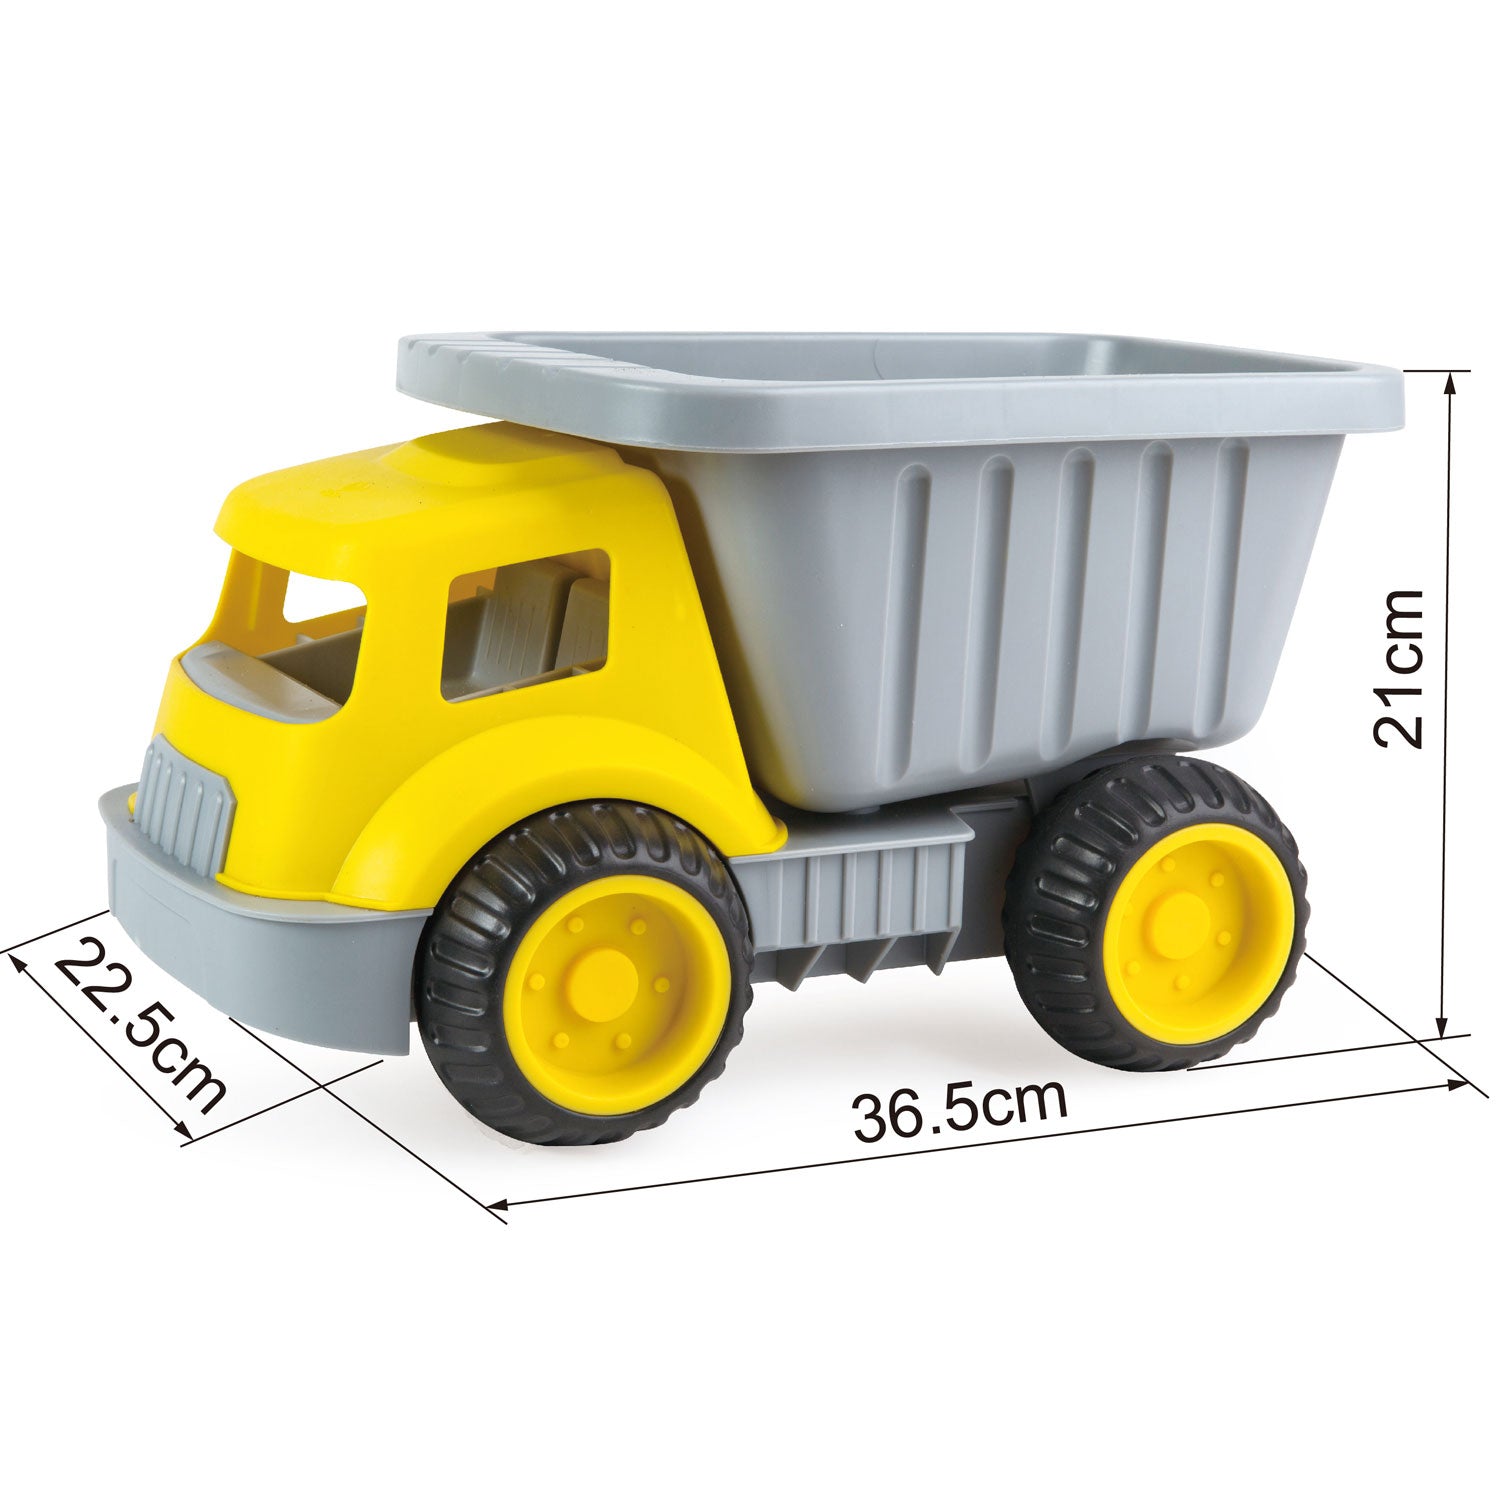 Hape Load & Tote Dump Truck perfect for the sand or backyard play with quality outdoor toys The Toy Wagon